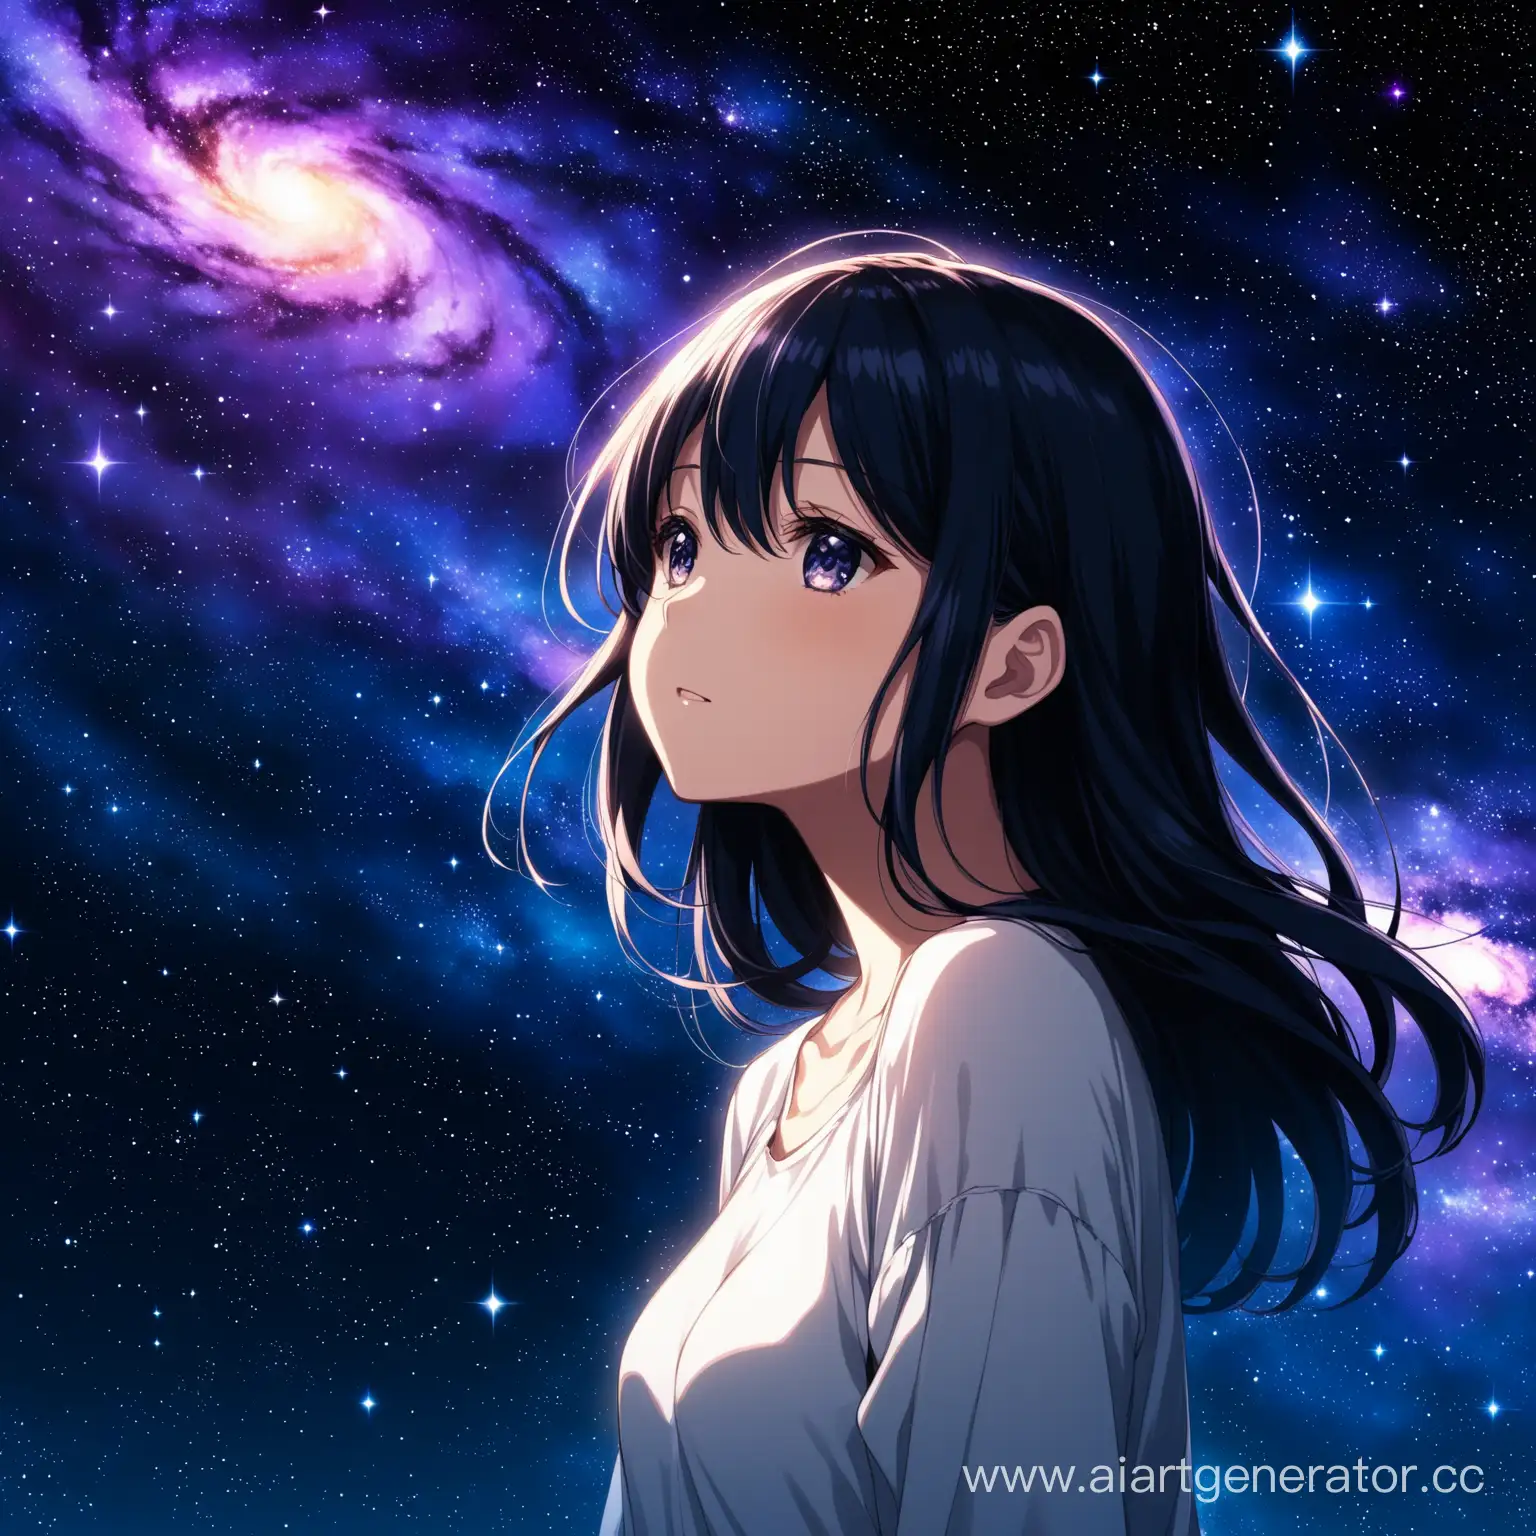 Anime-Girl-Enthralled-by-the-Cosmic-Abyss